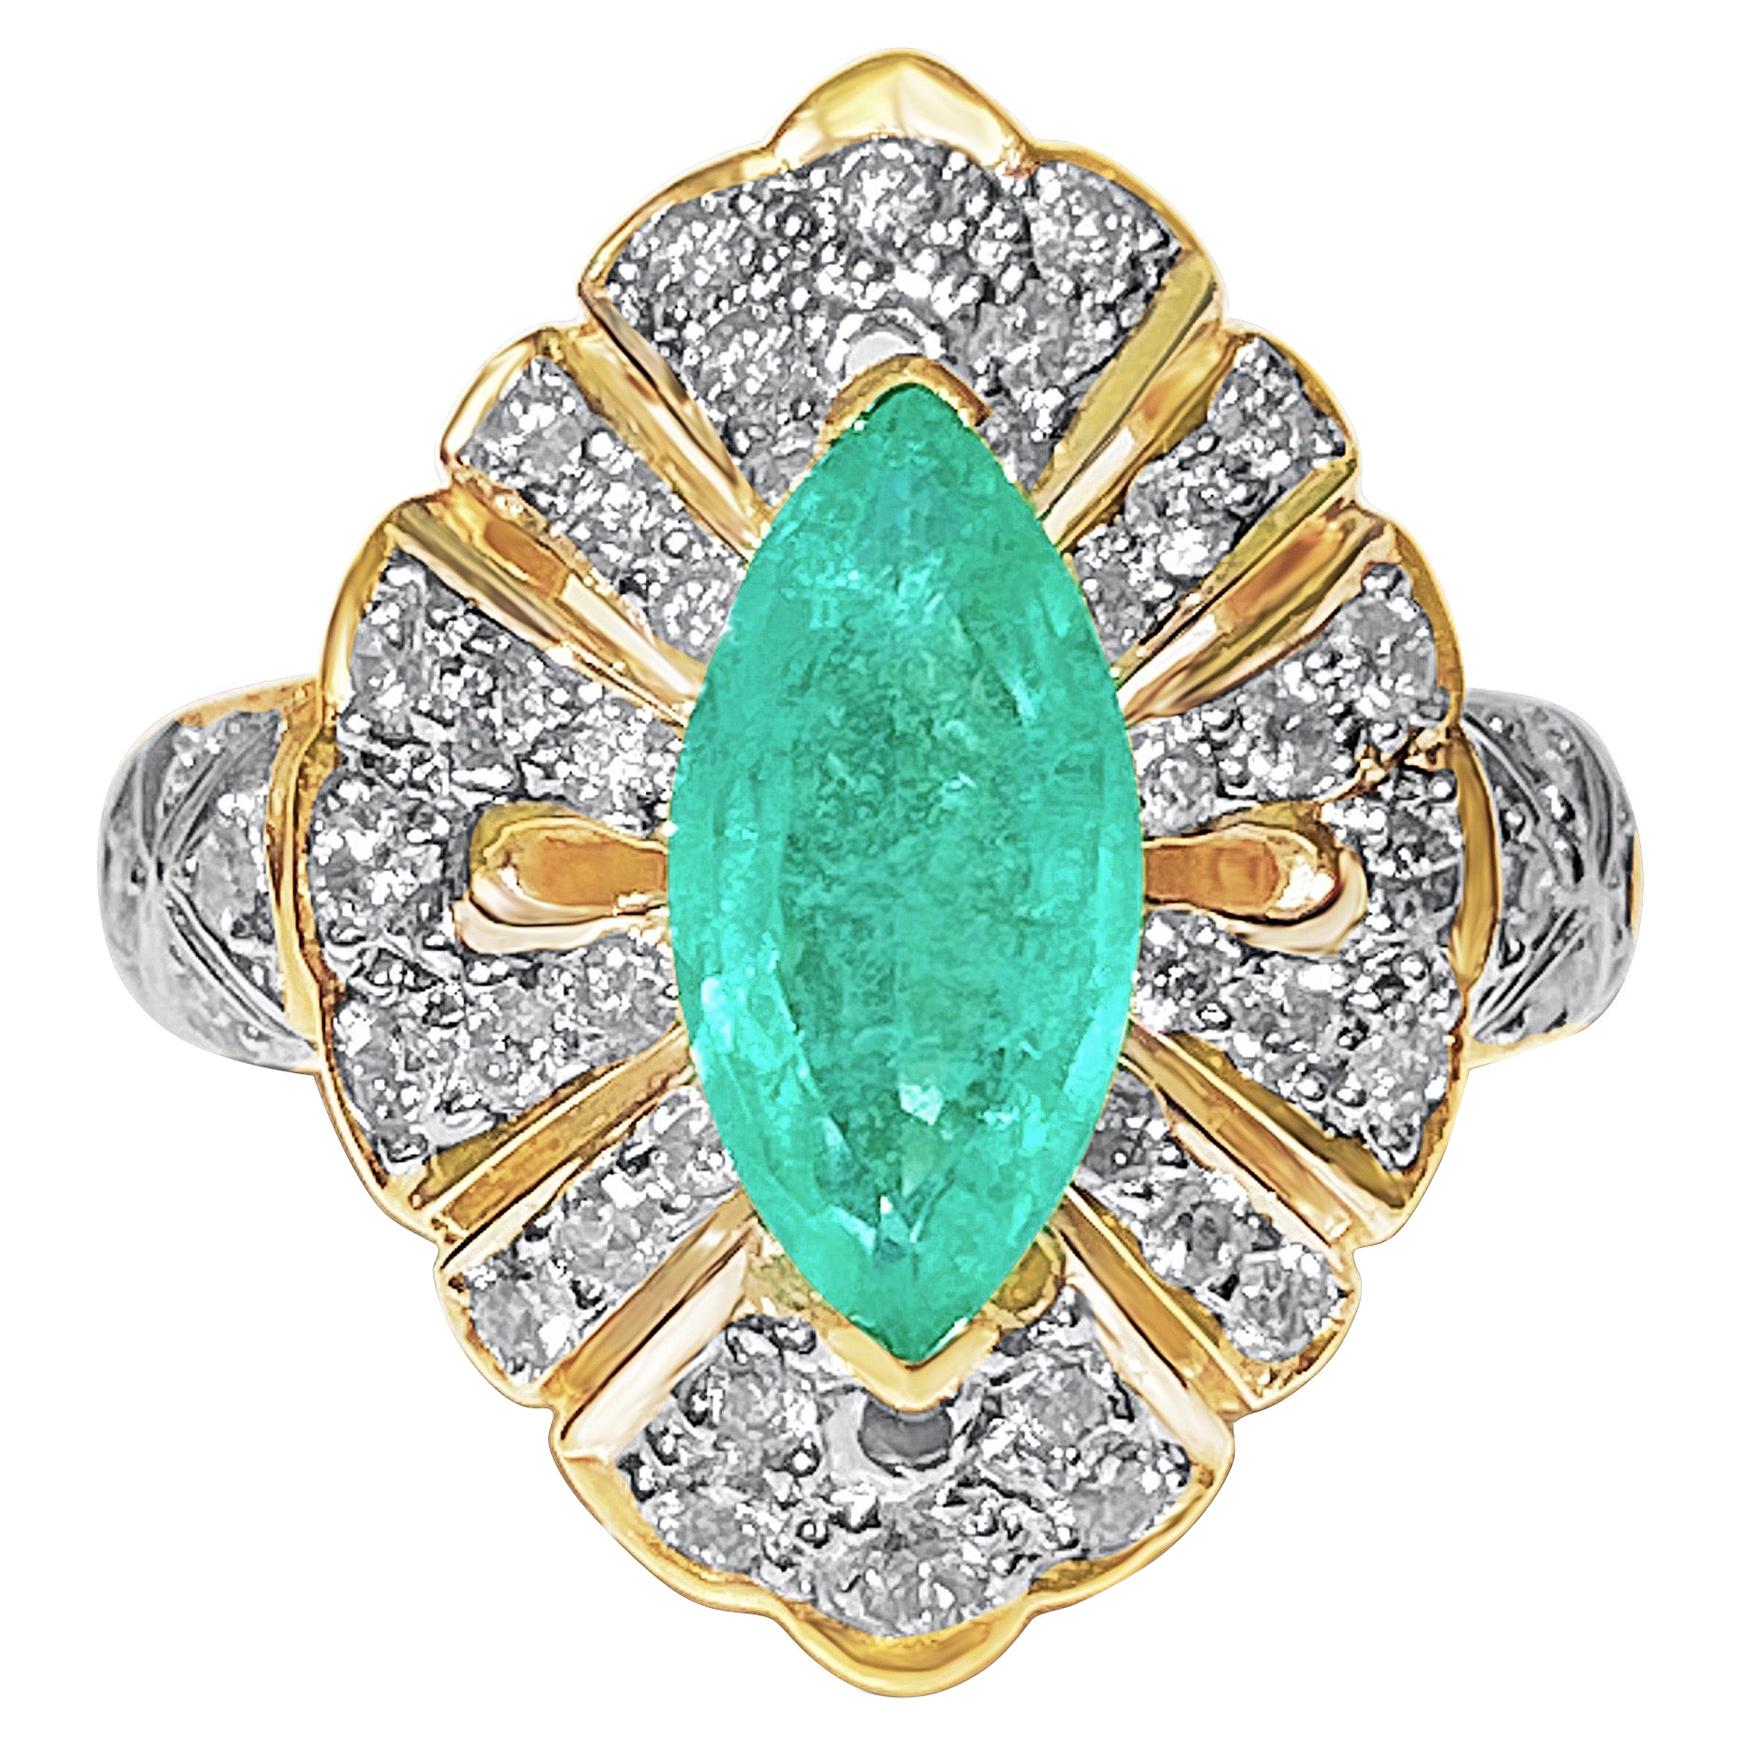 1.50 Carat Marquis Cut Colombian Emerald, Diamond and 14 Karat Yellow Gold Ring For Sale